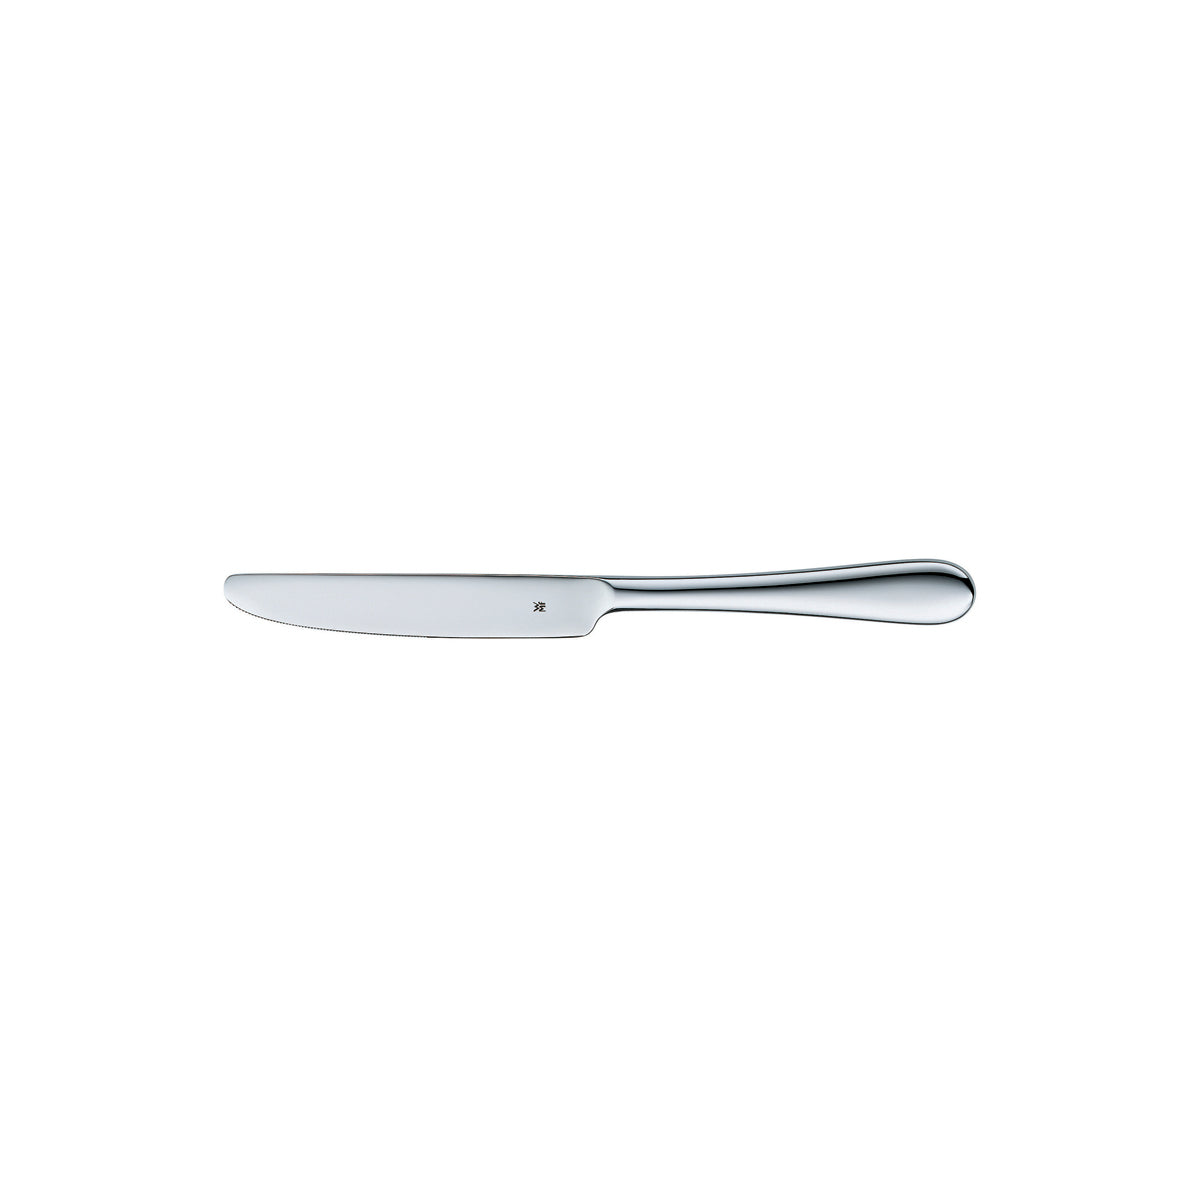 12.1903.6047 WMF Signum Table Knife - Hollow Handle Stainless Steel Tomkin Australia Hospitality Supplies